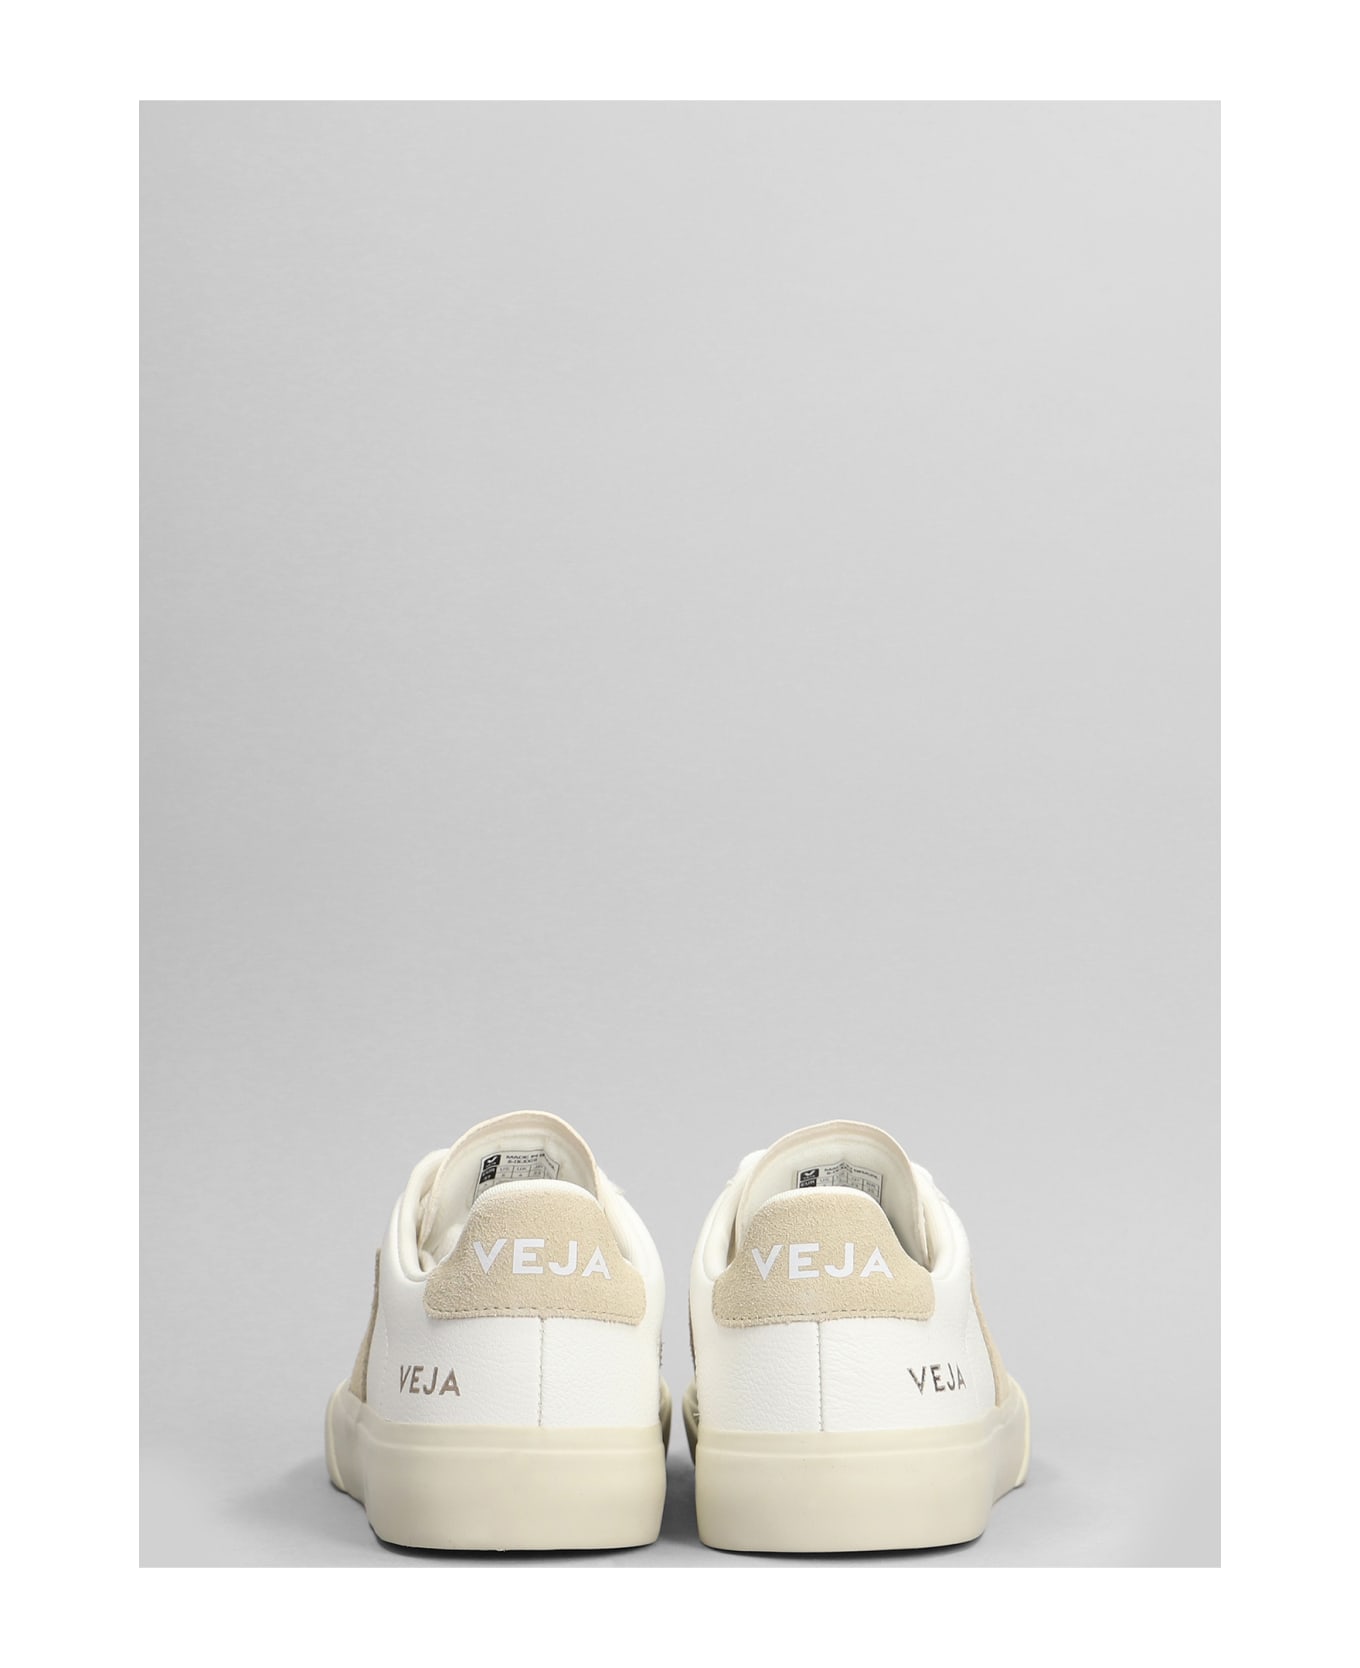 Veja Campo Sneakers In White Leather - white スニーカー